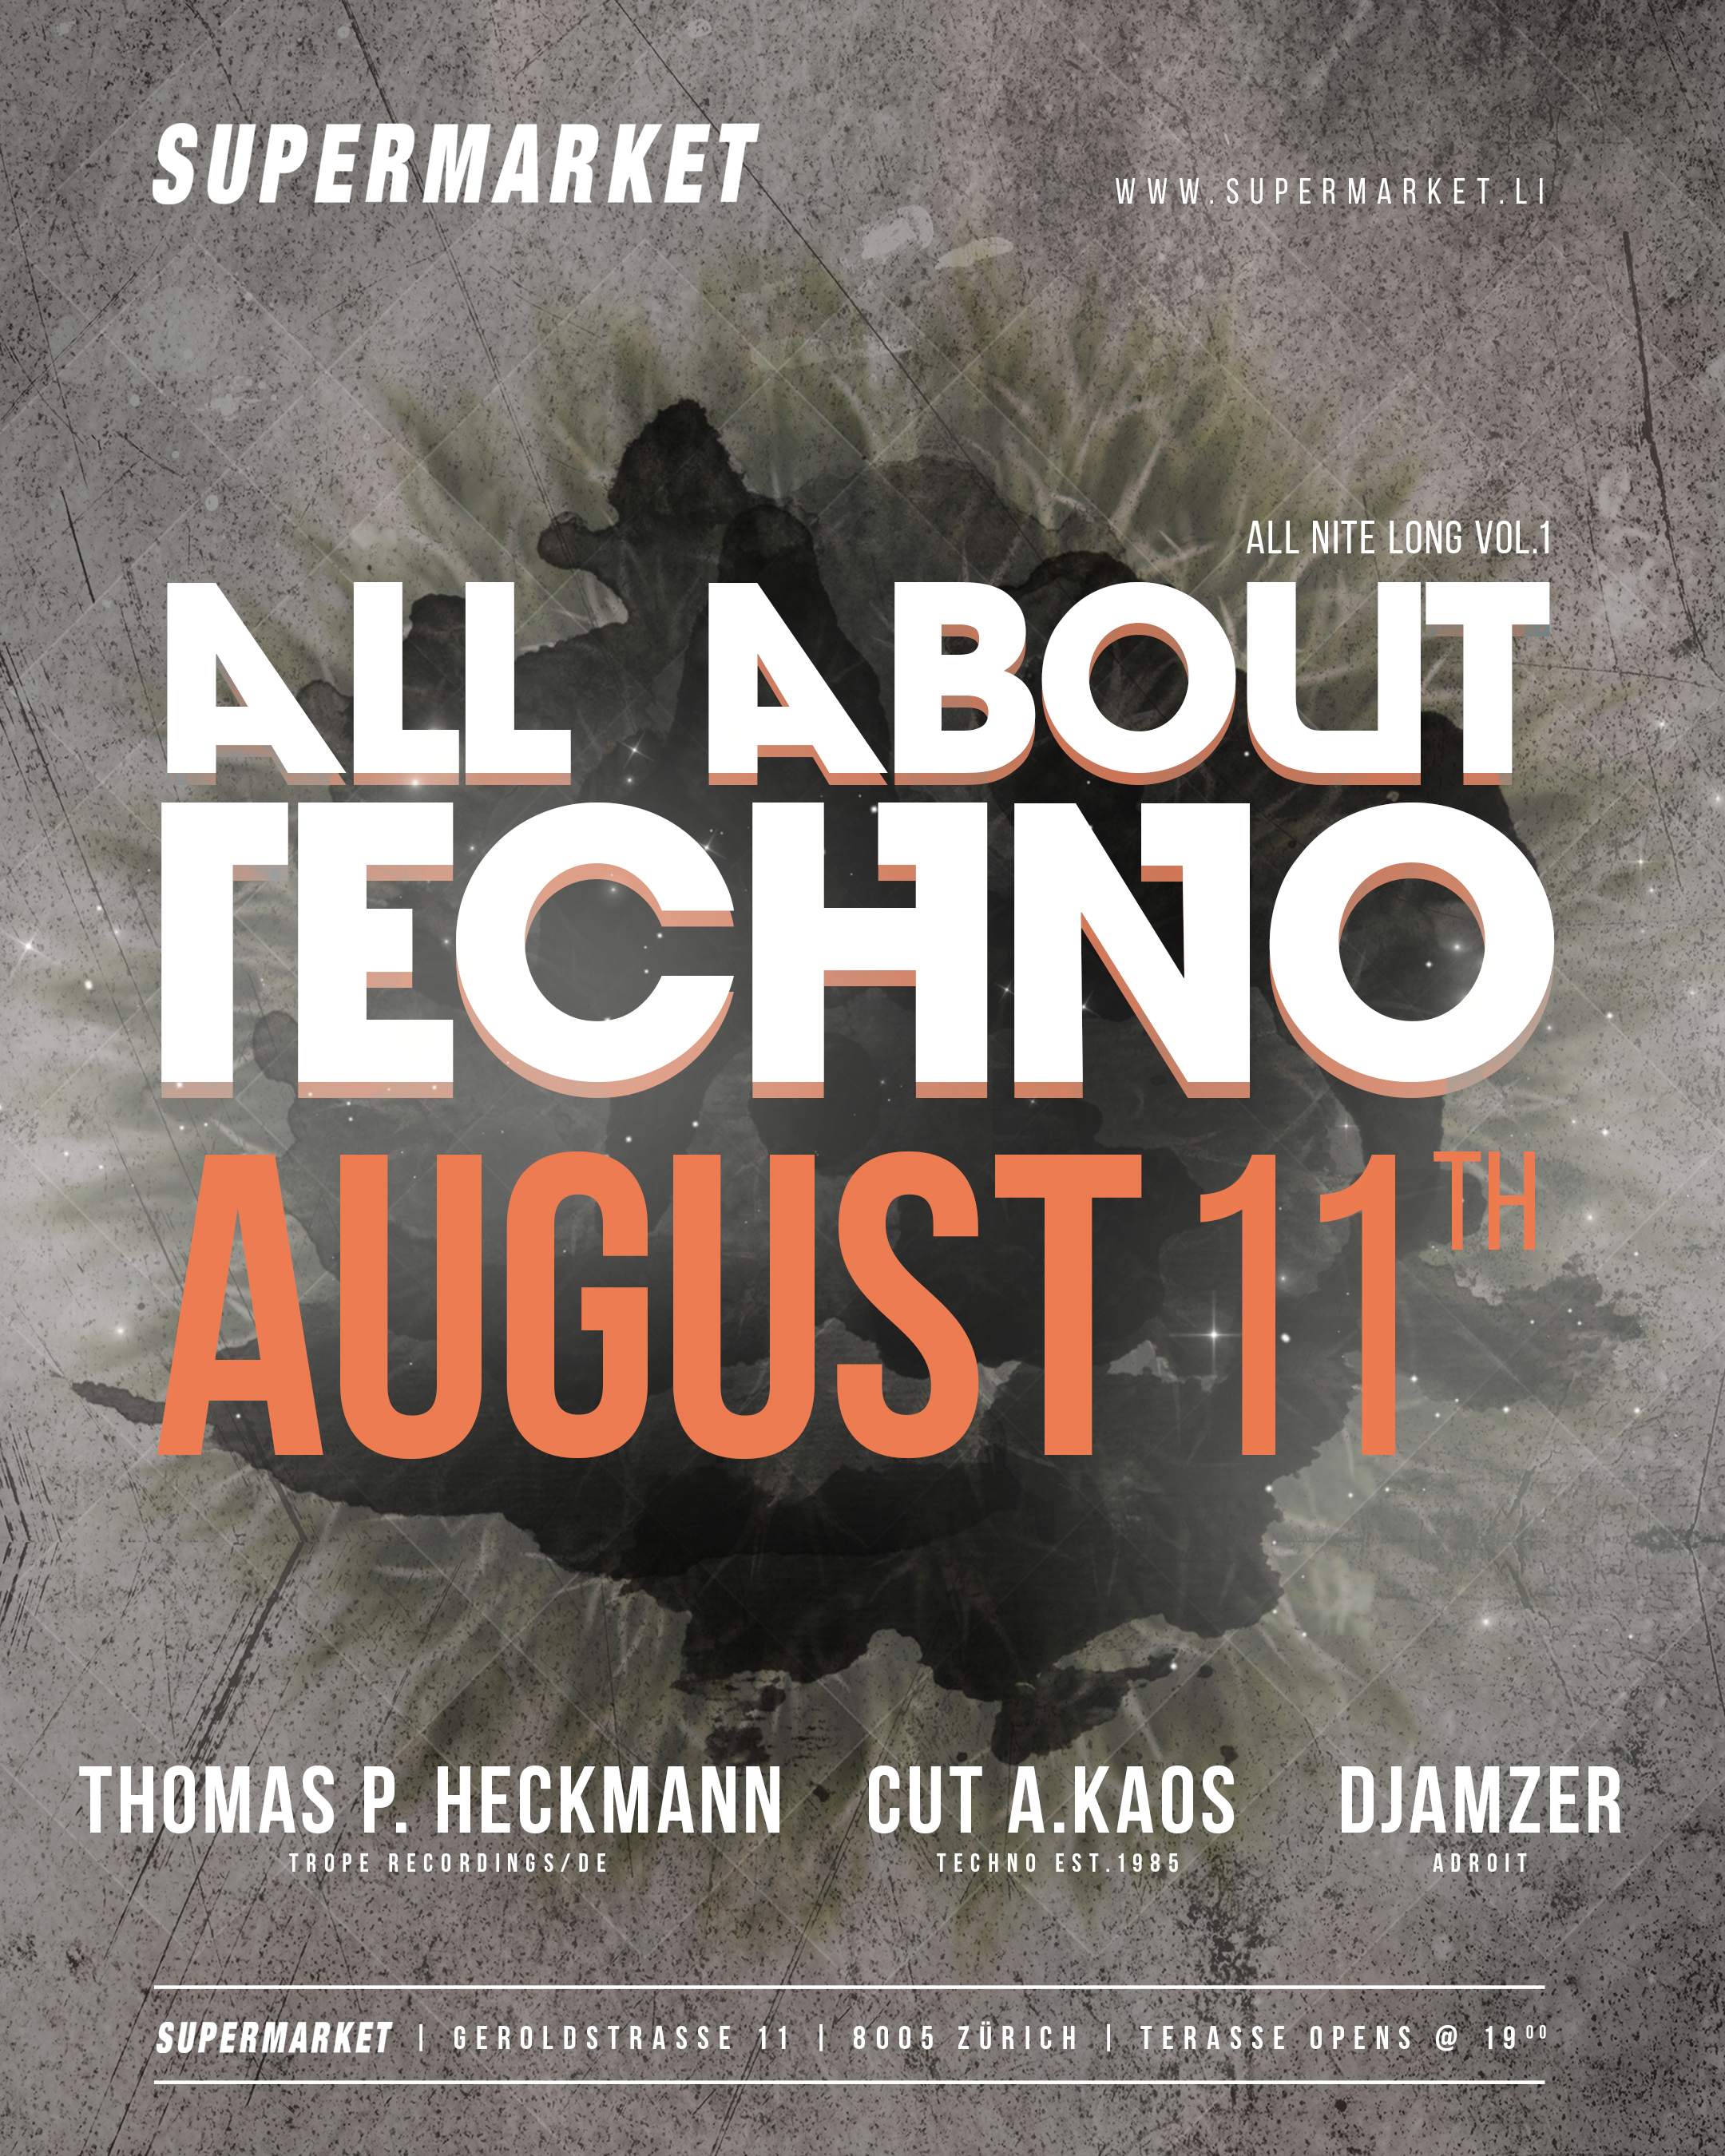 It, s all about techno w/ Thomas P. Heckmann - フライヤー表